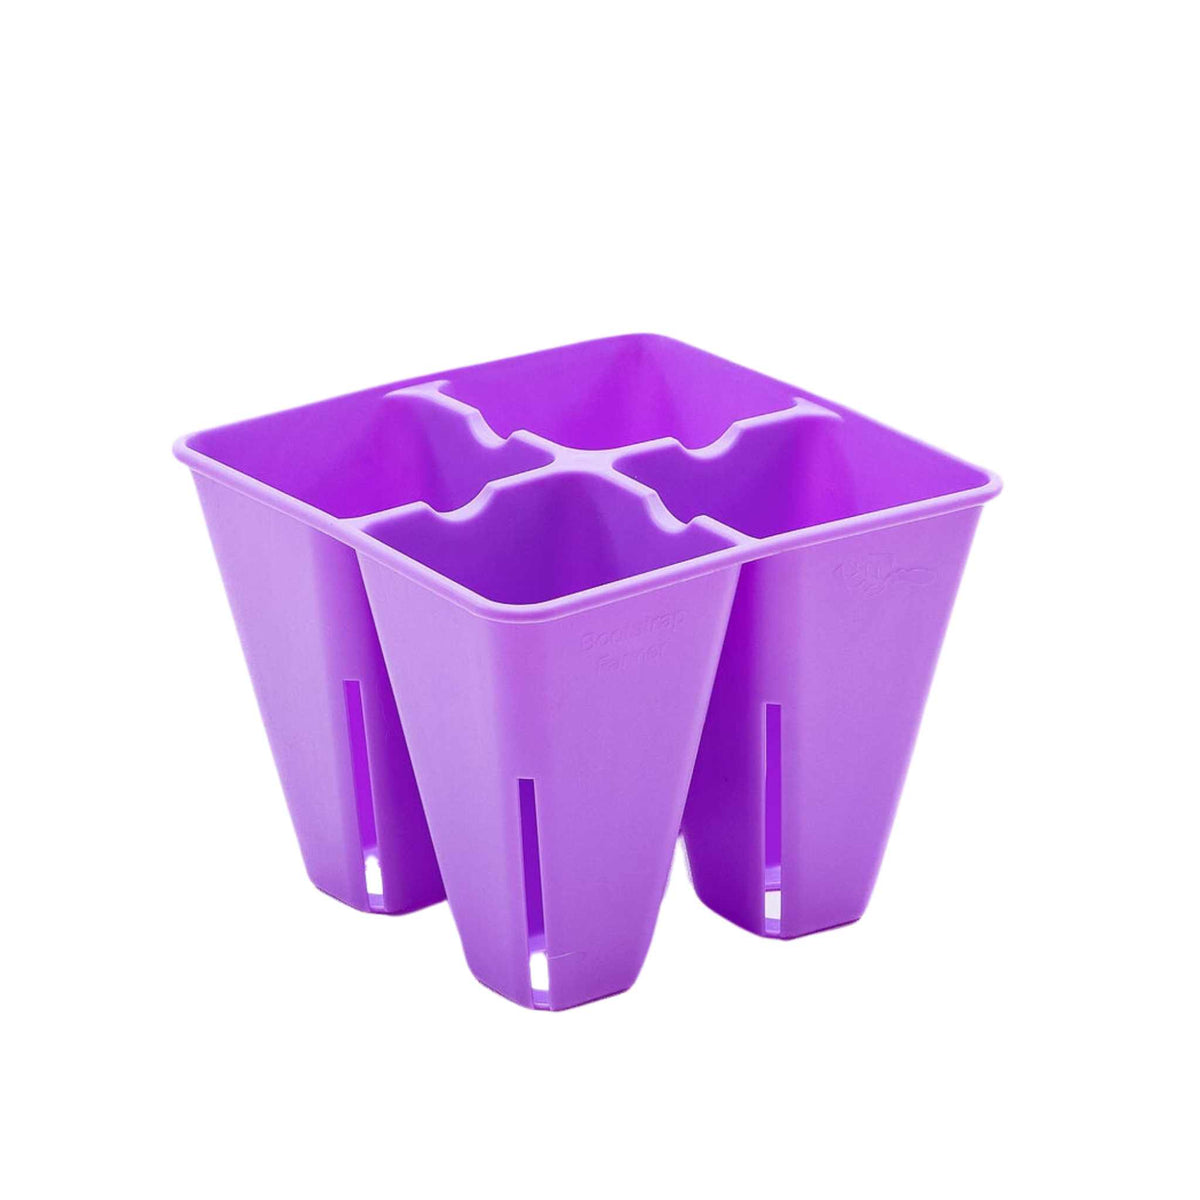 Plastic Tray Insert, 6 Section, for Shallow Trays, Pack of 6, FREE SHI -  NextGen Furniture, Inc.